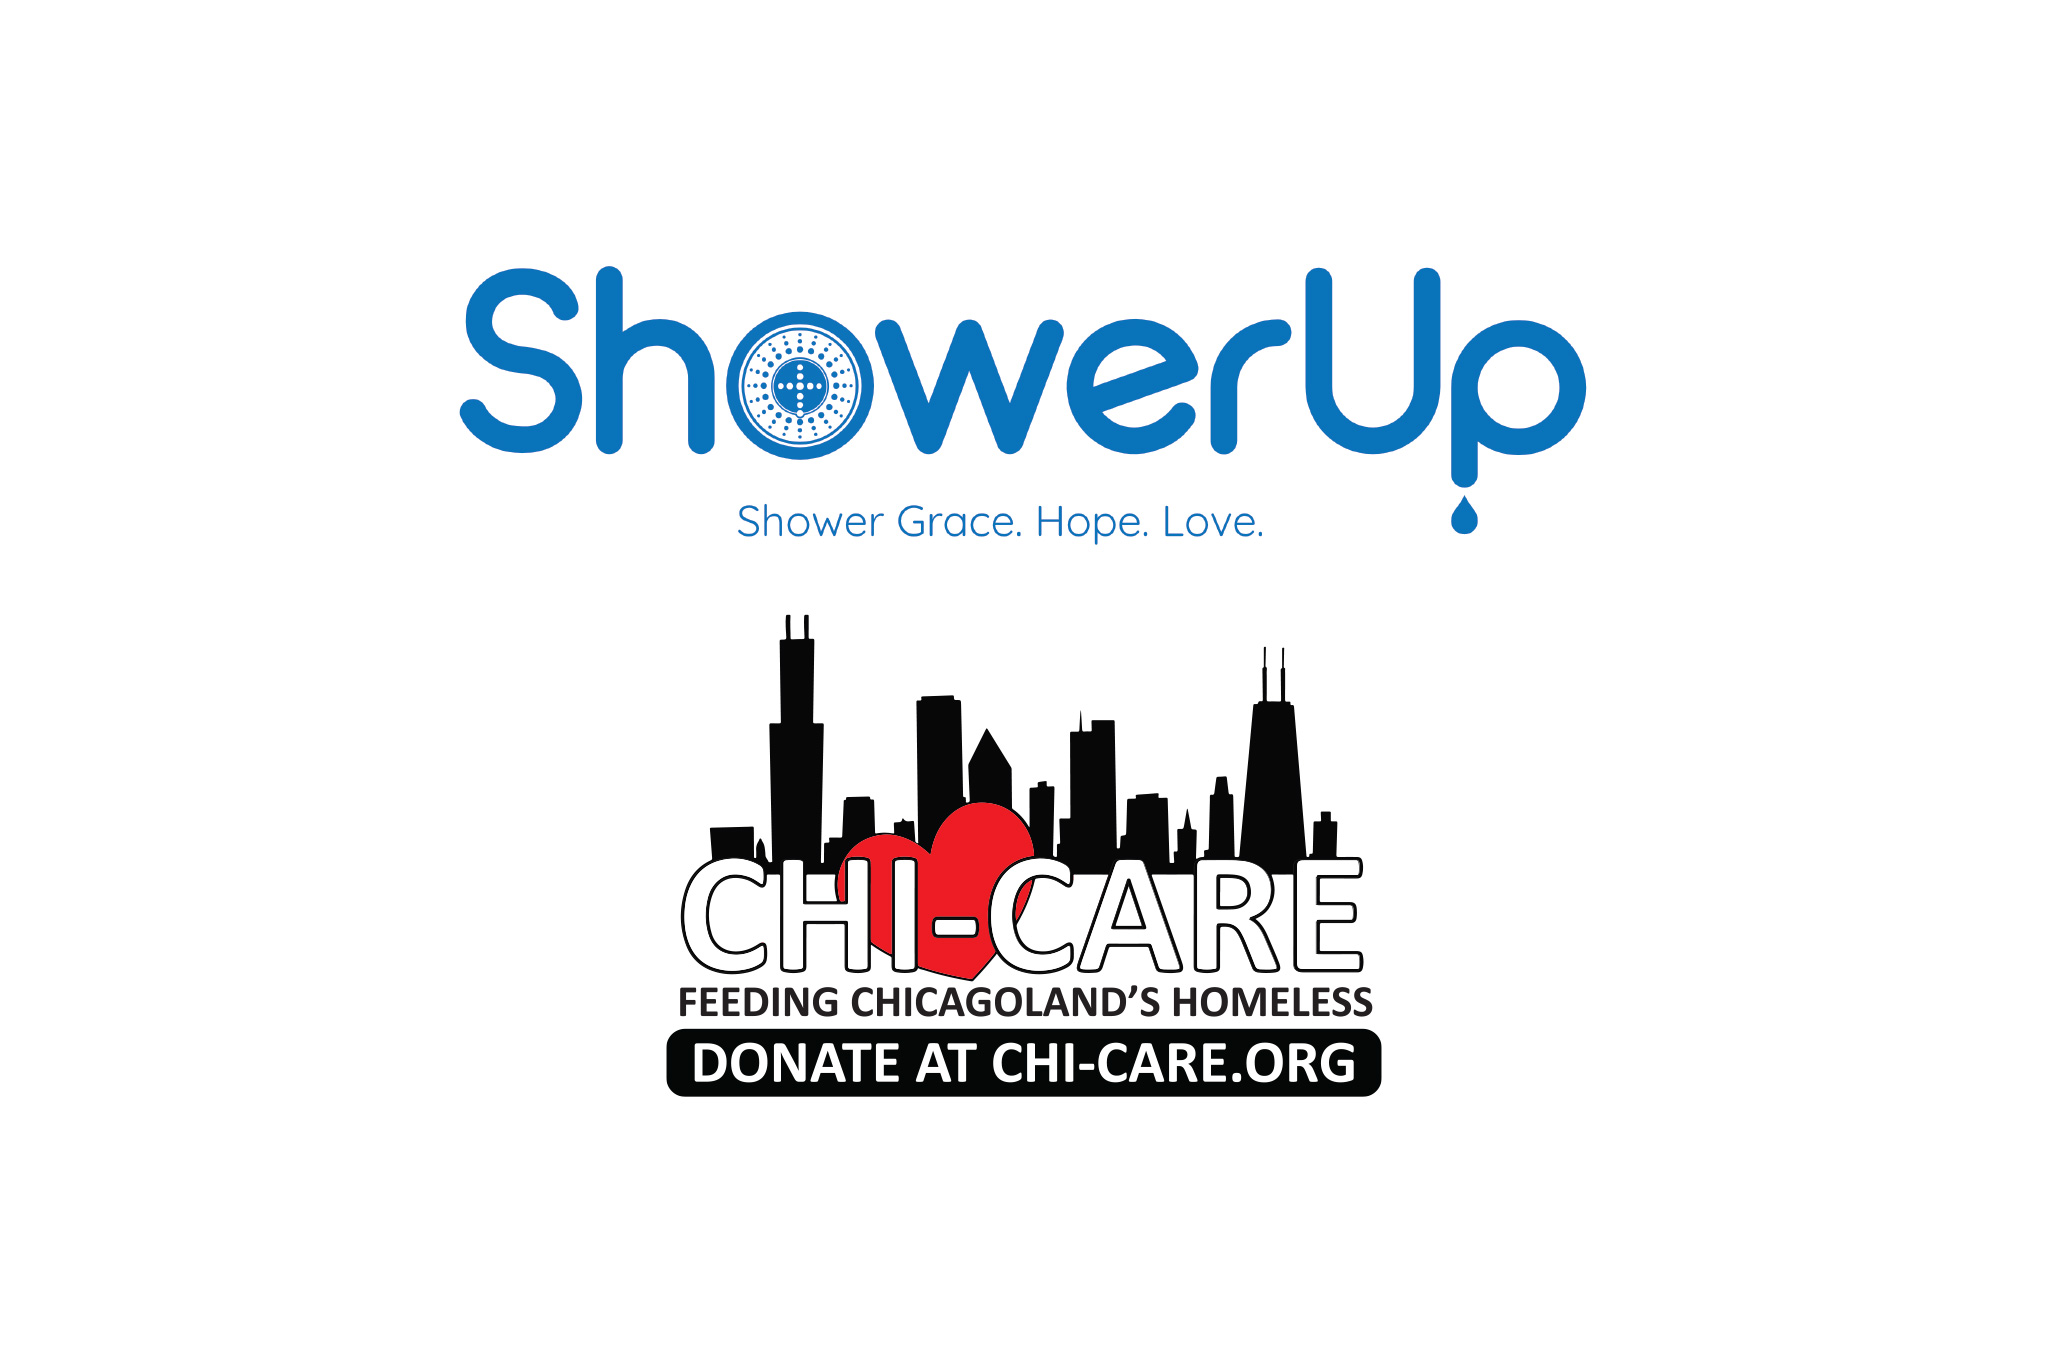 Shower Up and Chi-Care logos